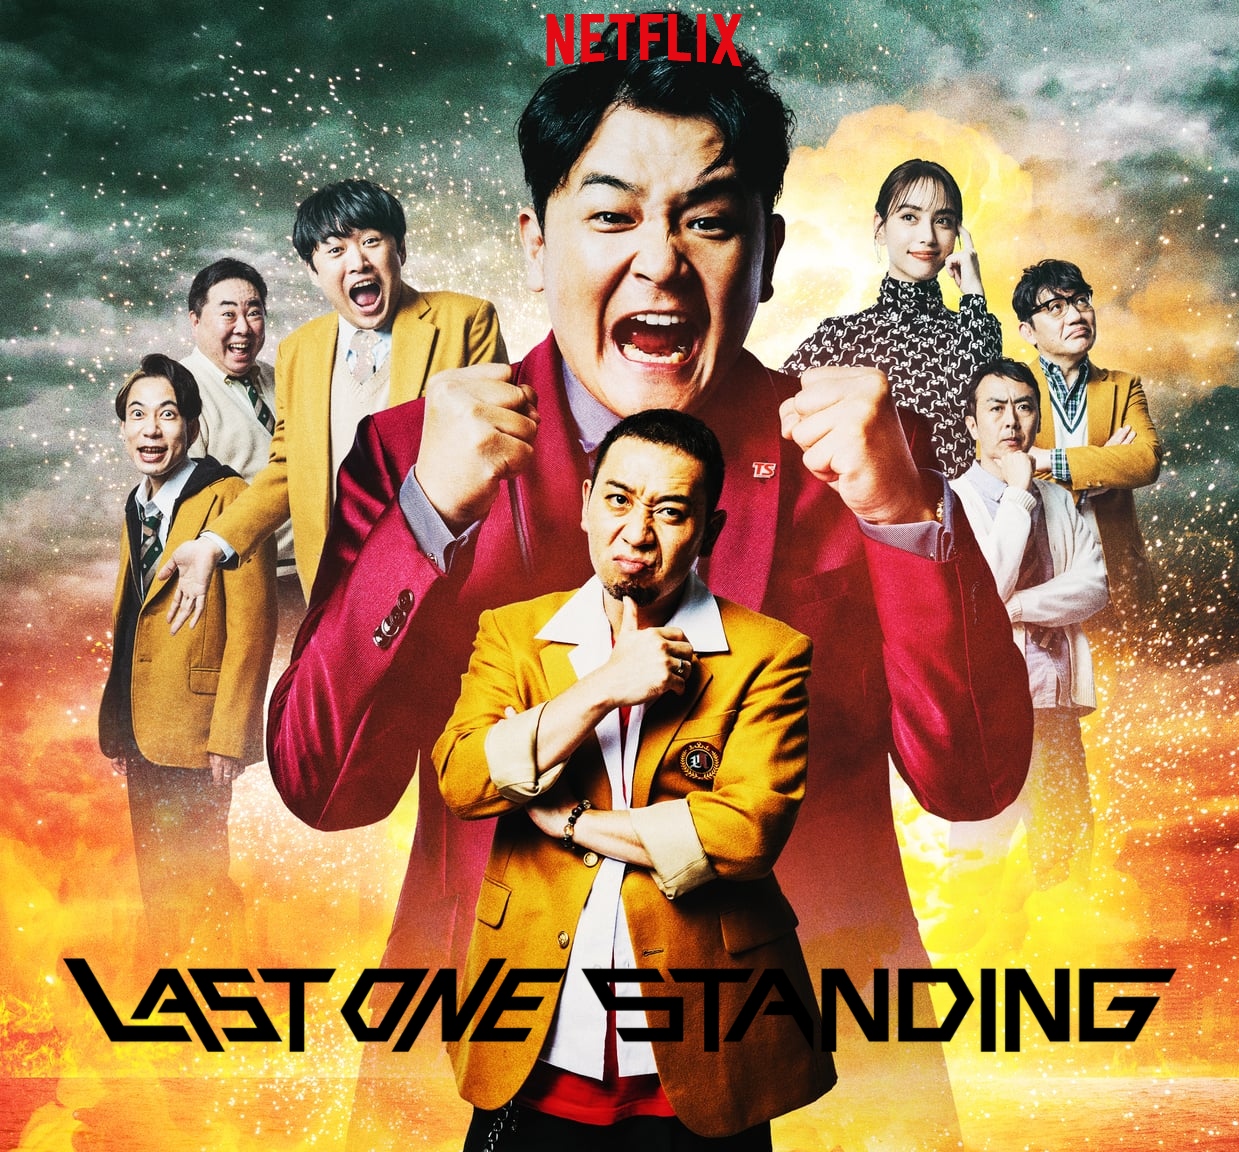 Is Last One Standing (2022) on Netflix